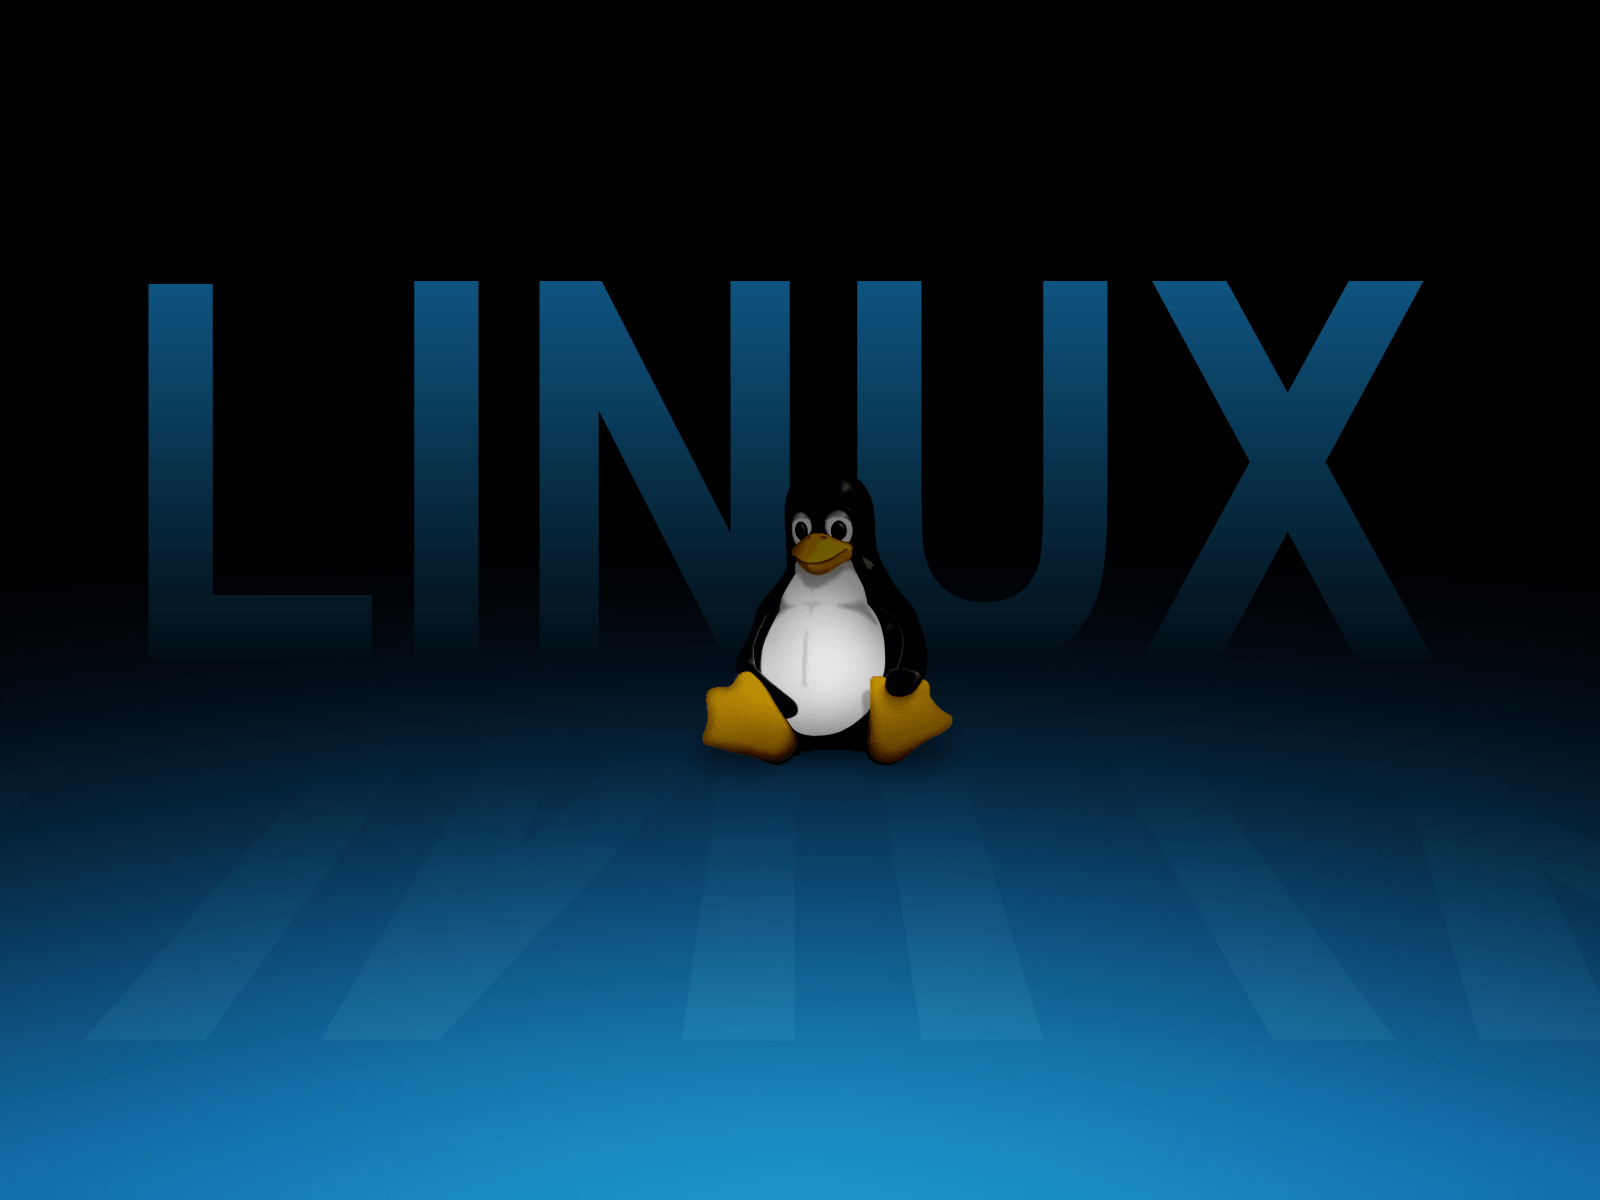 Wallpaper Designs Featuring the Linux Mascot